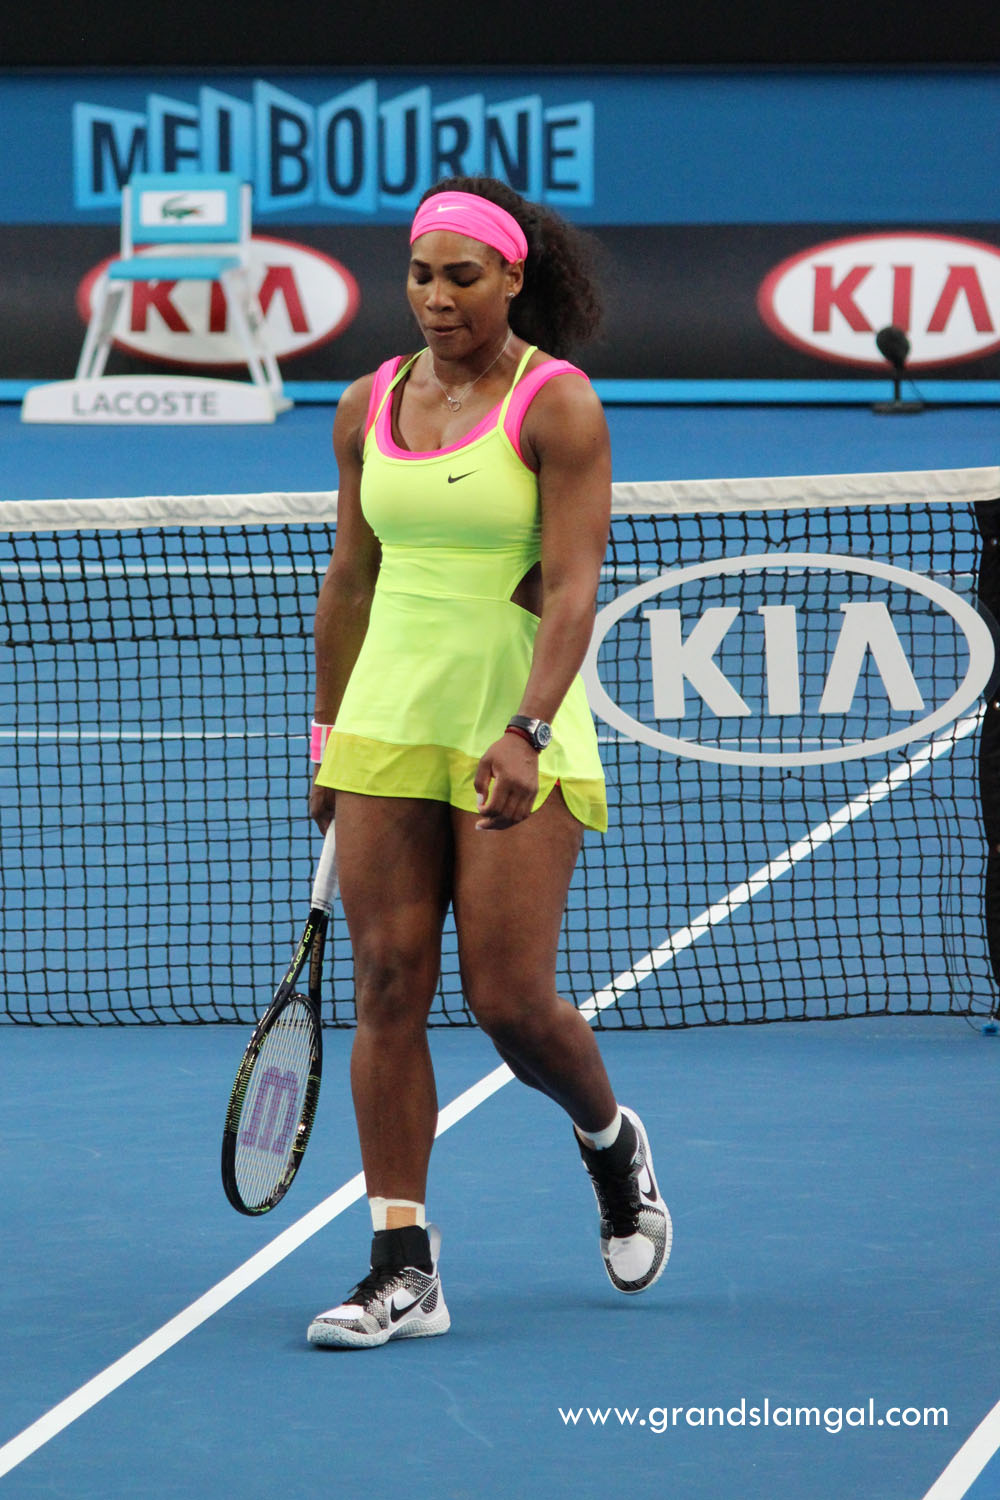 Lake Taupo Zijdelings Kinematica Serena Williams' Australian Open 2015 Pink and Yellow Nike Outfit